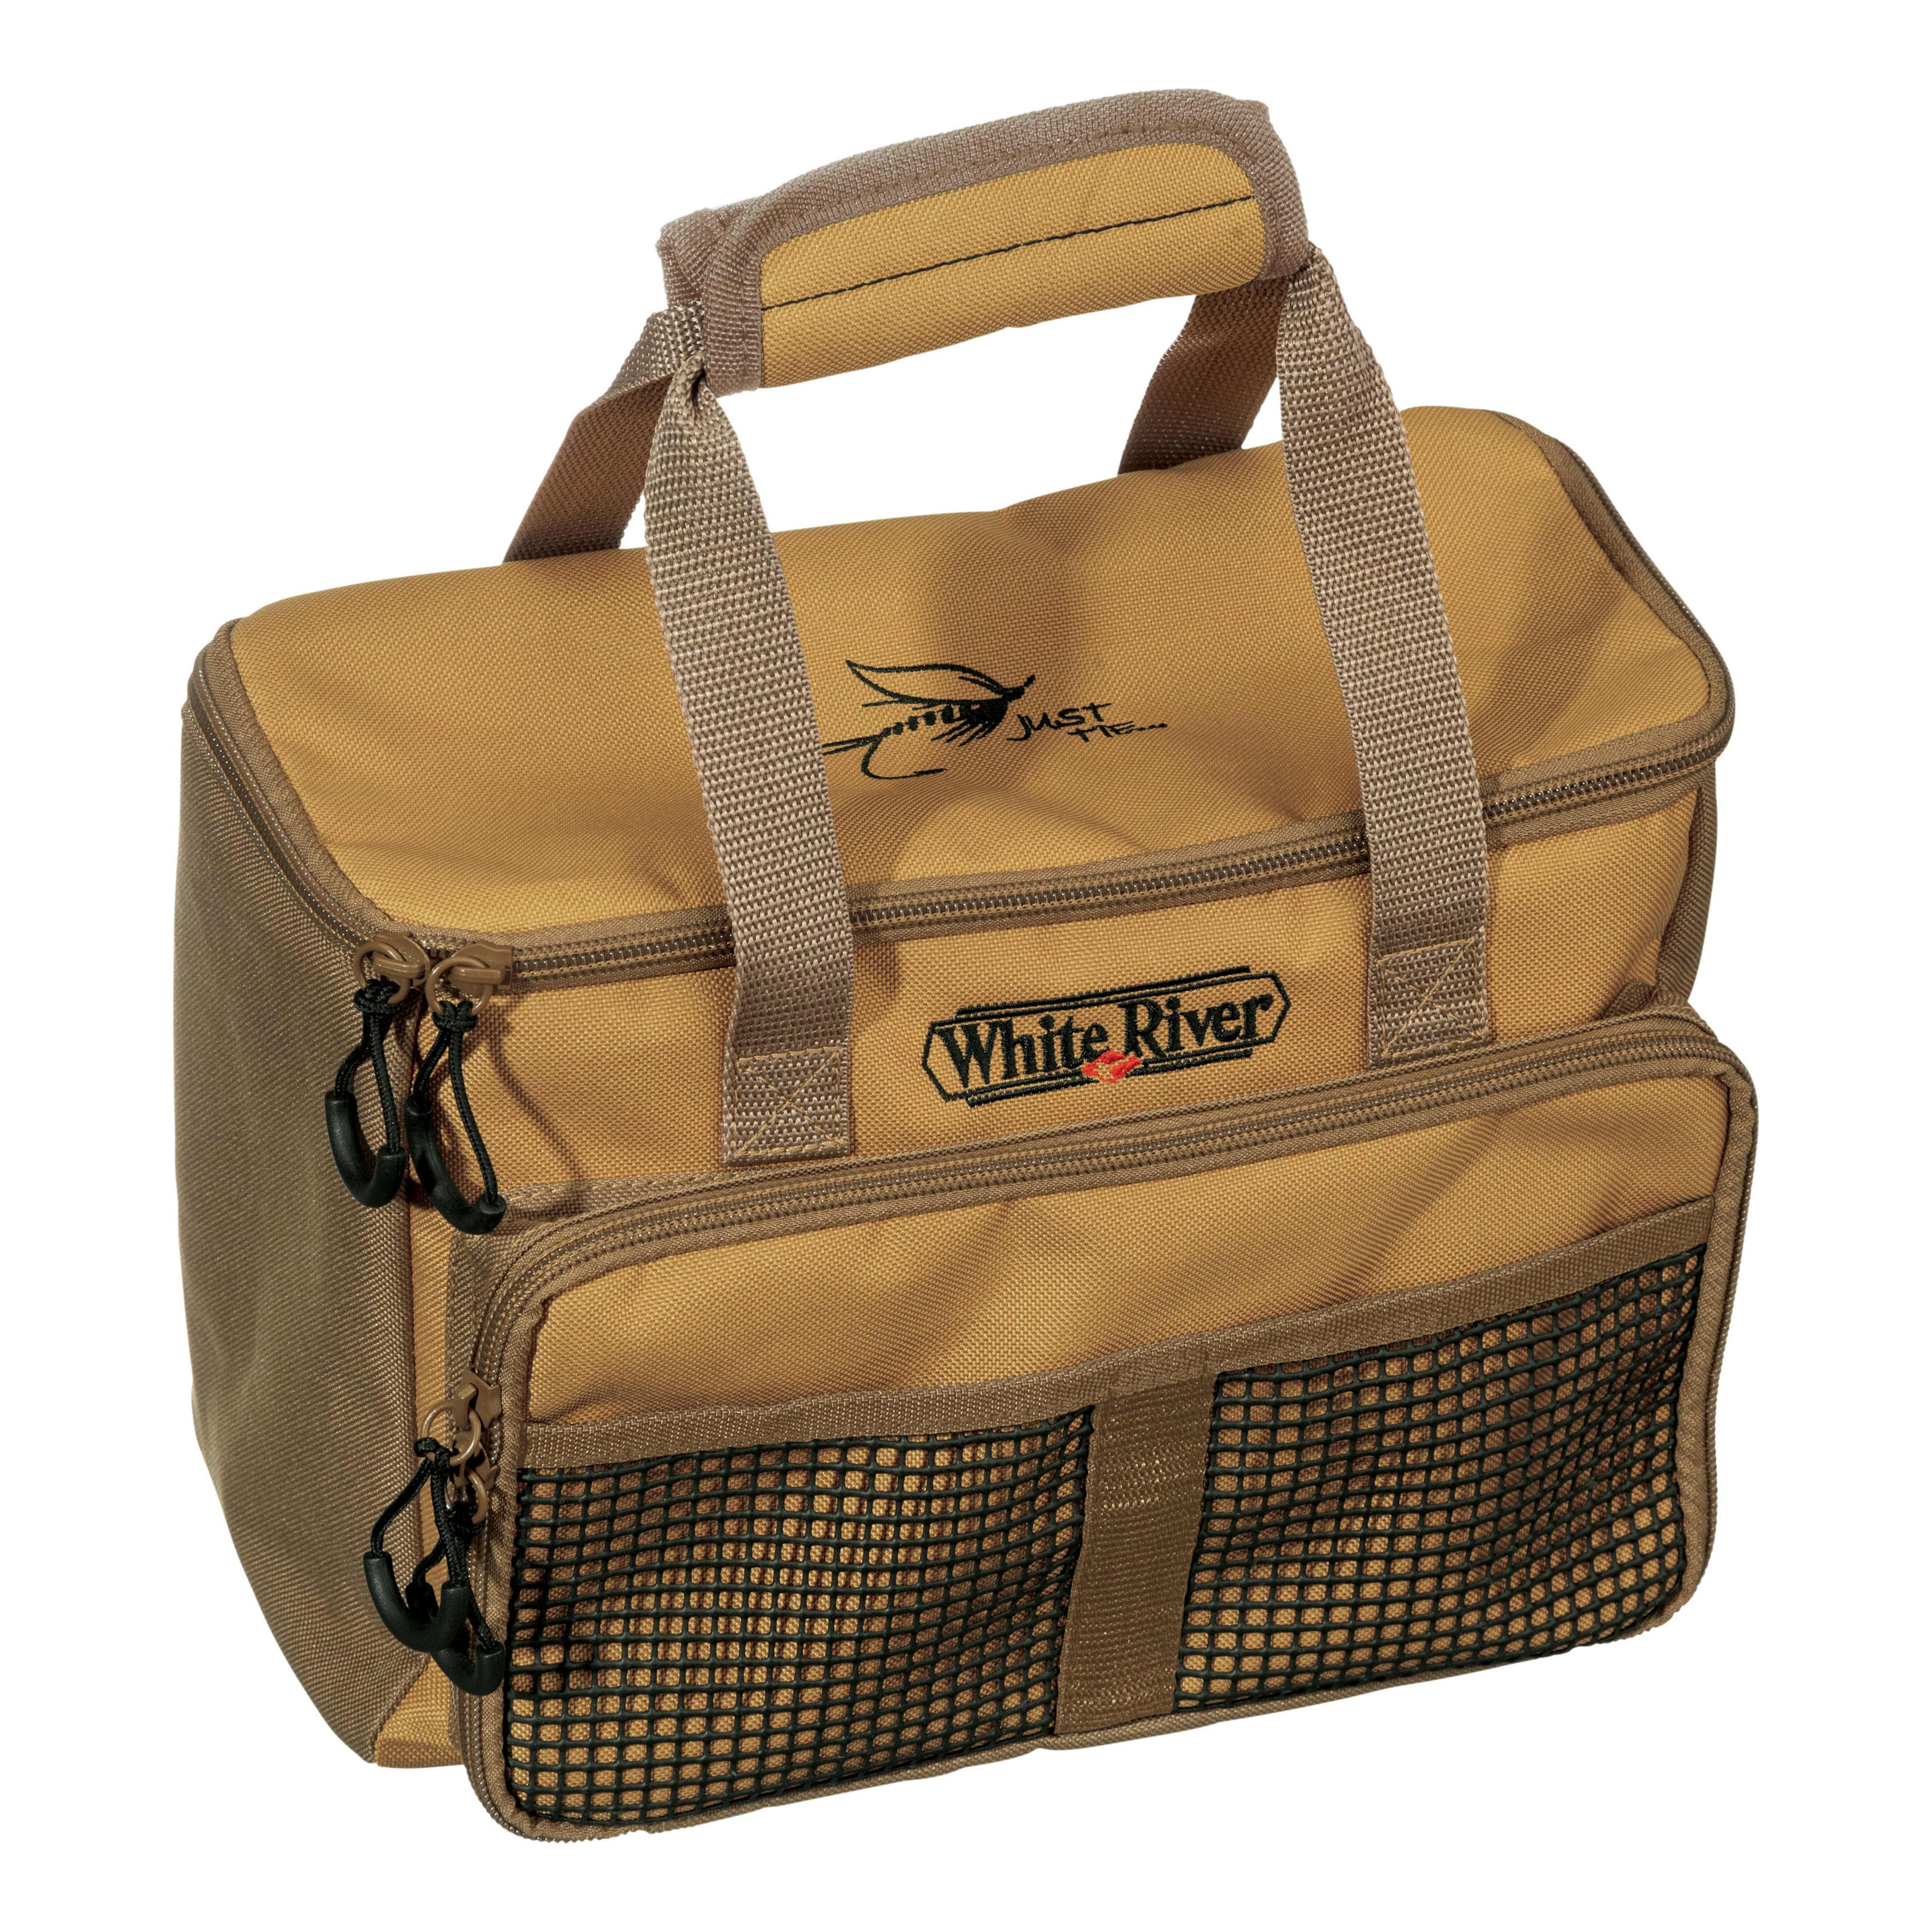  Fishing Tackle Carryall Bag Fishing Chair Bag Shoulder  Fishing Bag Fishing Rod Bag Fishing Tackle Bag Backpack for Fishing Rod  Lure Baits (Color: Tan, Size: 80x48x19cm) : Sports & Outdoors